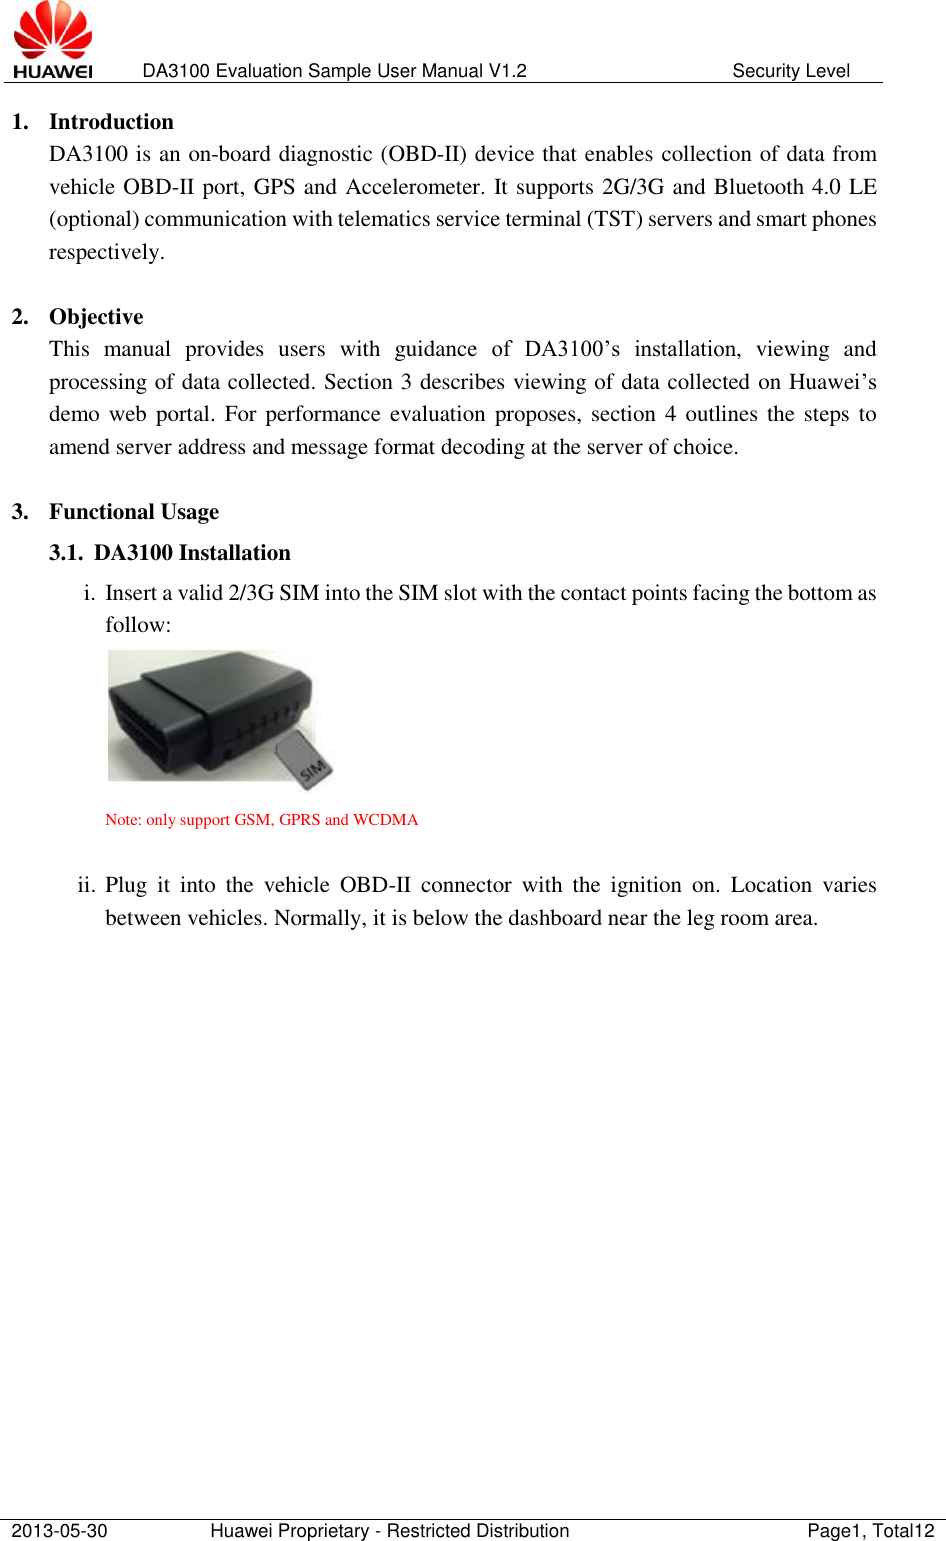   DA3100 Evaluation Sample User Manual V1.2 Security Level  2013-05-30 Huawei Proprietary - Restricted Distribution Page1, Total12  1. Introduction DA3100 is an on-board diagnostic (OBD-II) device that enables collection of data from vehicle OBD-II port, GPS and Accelerometer. It supports 2G/3G and Bluetooth 4.0 LE (optional) communication with telematics service terminal (TST) servers and smart phones respectively.       2. Objective This  manual  provides  users  with  guidance  of  DA3100’s  installation,  viewing  and processing of data collected. Section 3 describes viewing of data collected on Huawei’s demo web  portal.  For  performance evaluation proposes, section 4  outlines the steps to amend server address and message format decoding at the server of choice.   3. Functional Usage 3.1. DA3100 Installation i. Insert a valid 2/3G SIM into the SIM slot with the contact points facing the bottom as follow:  Note: only support GSM, GPRS and WCDMA  ii. Plug  it  into  the  vehicle  OBD-II  connector  with  the  ignition  on.  Location  varies between vehicles. Normally, it is below the dashboard near the leg room area.                  